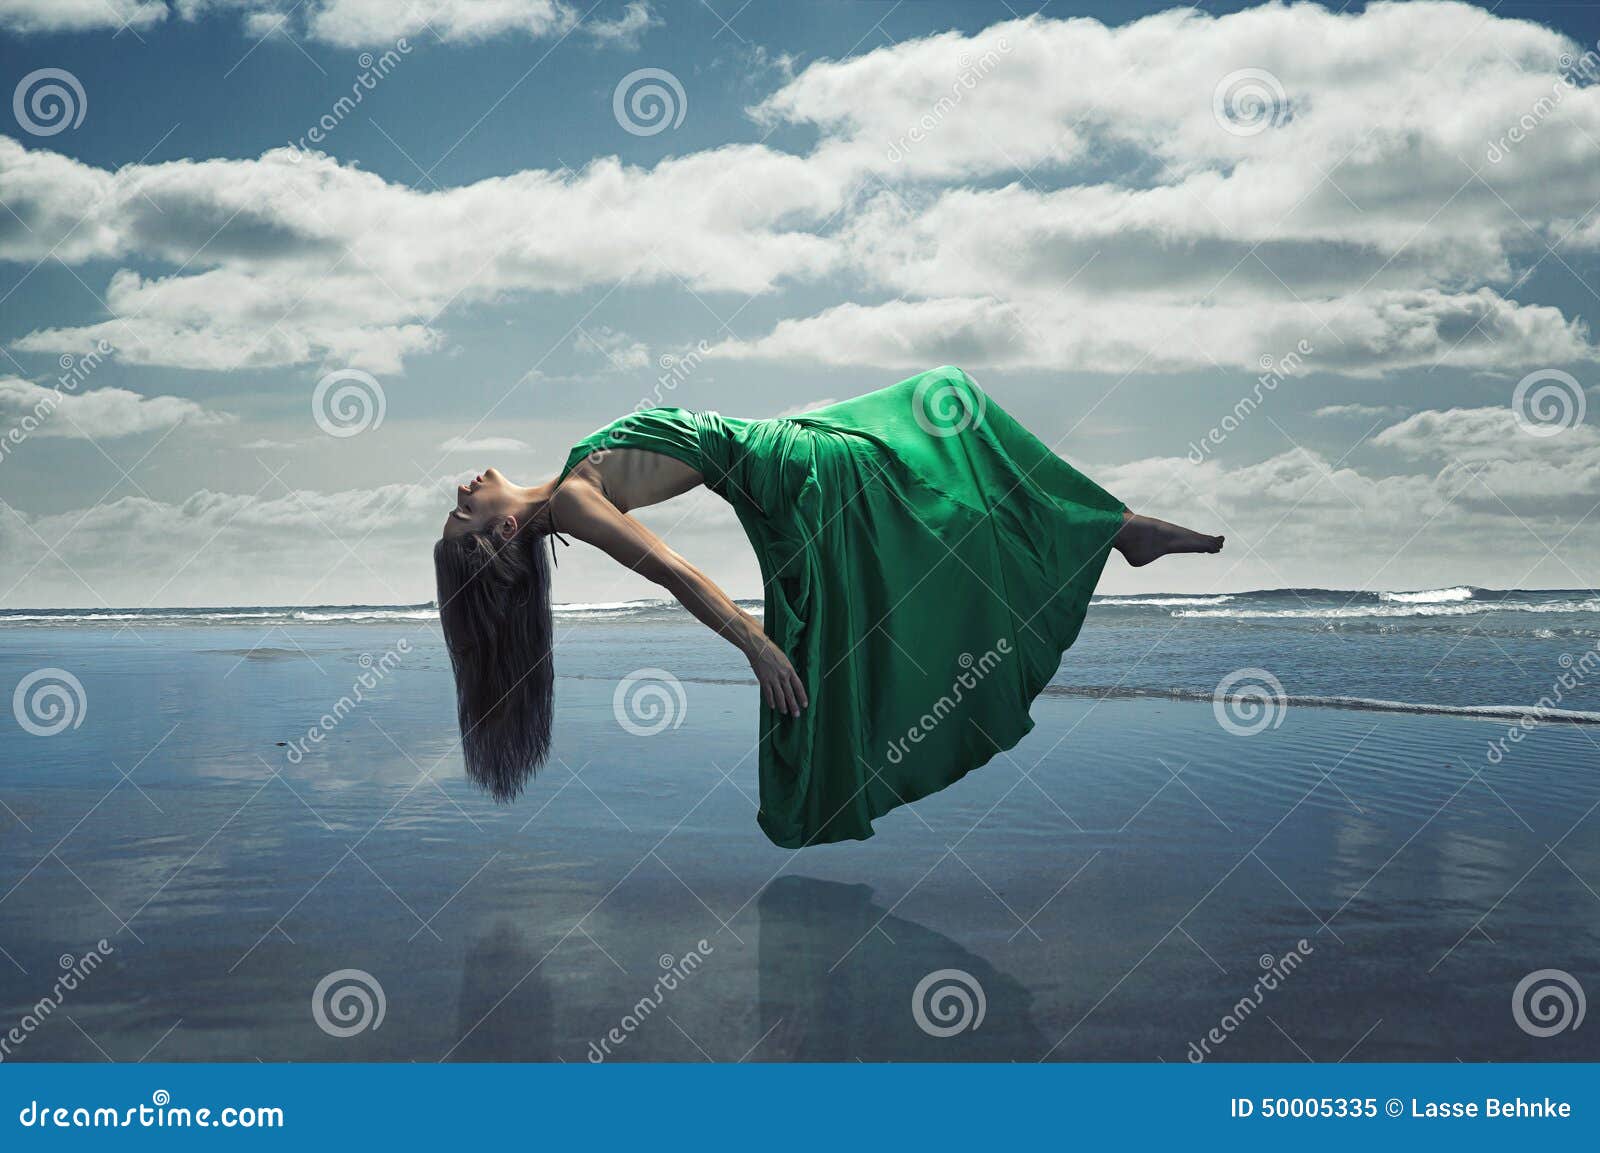 floating woman